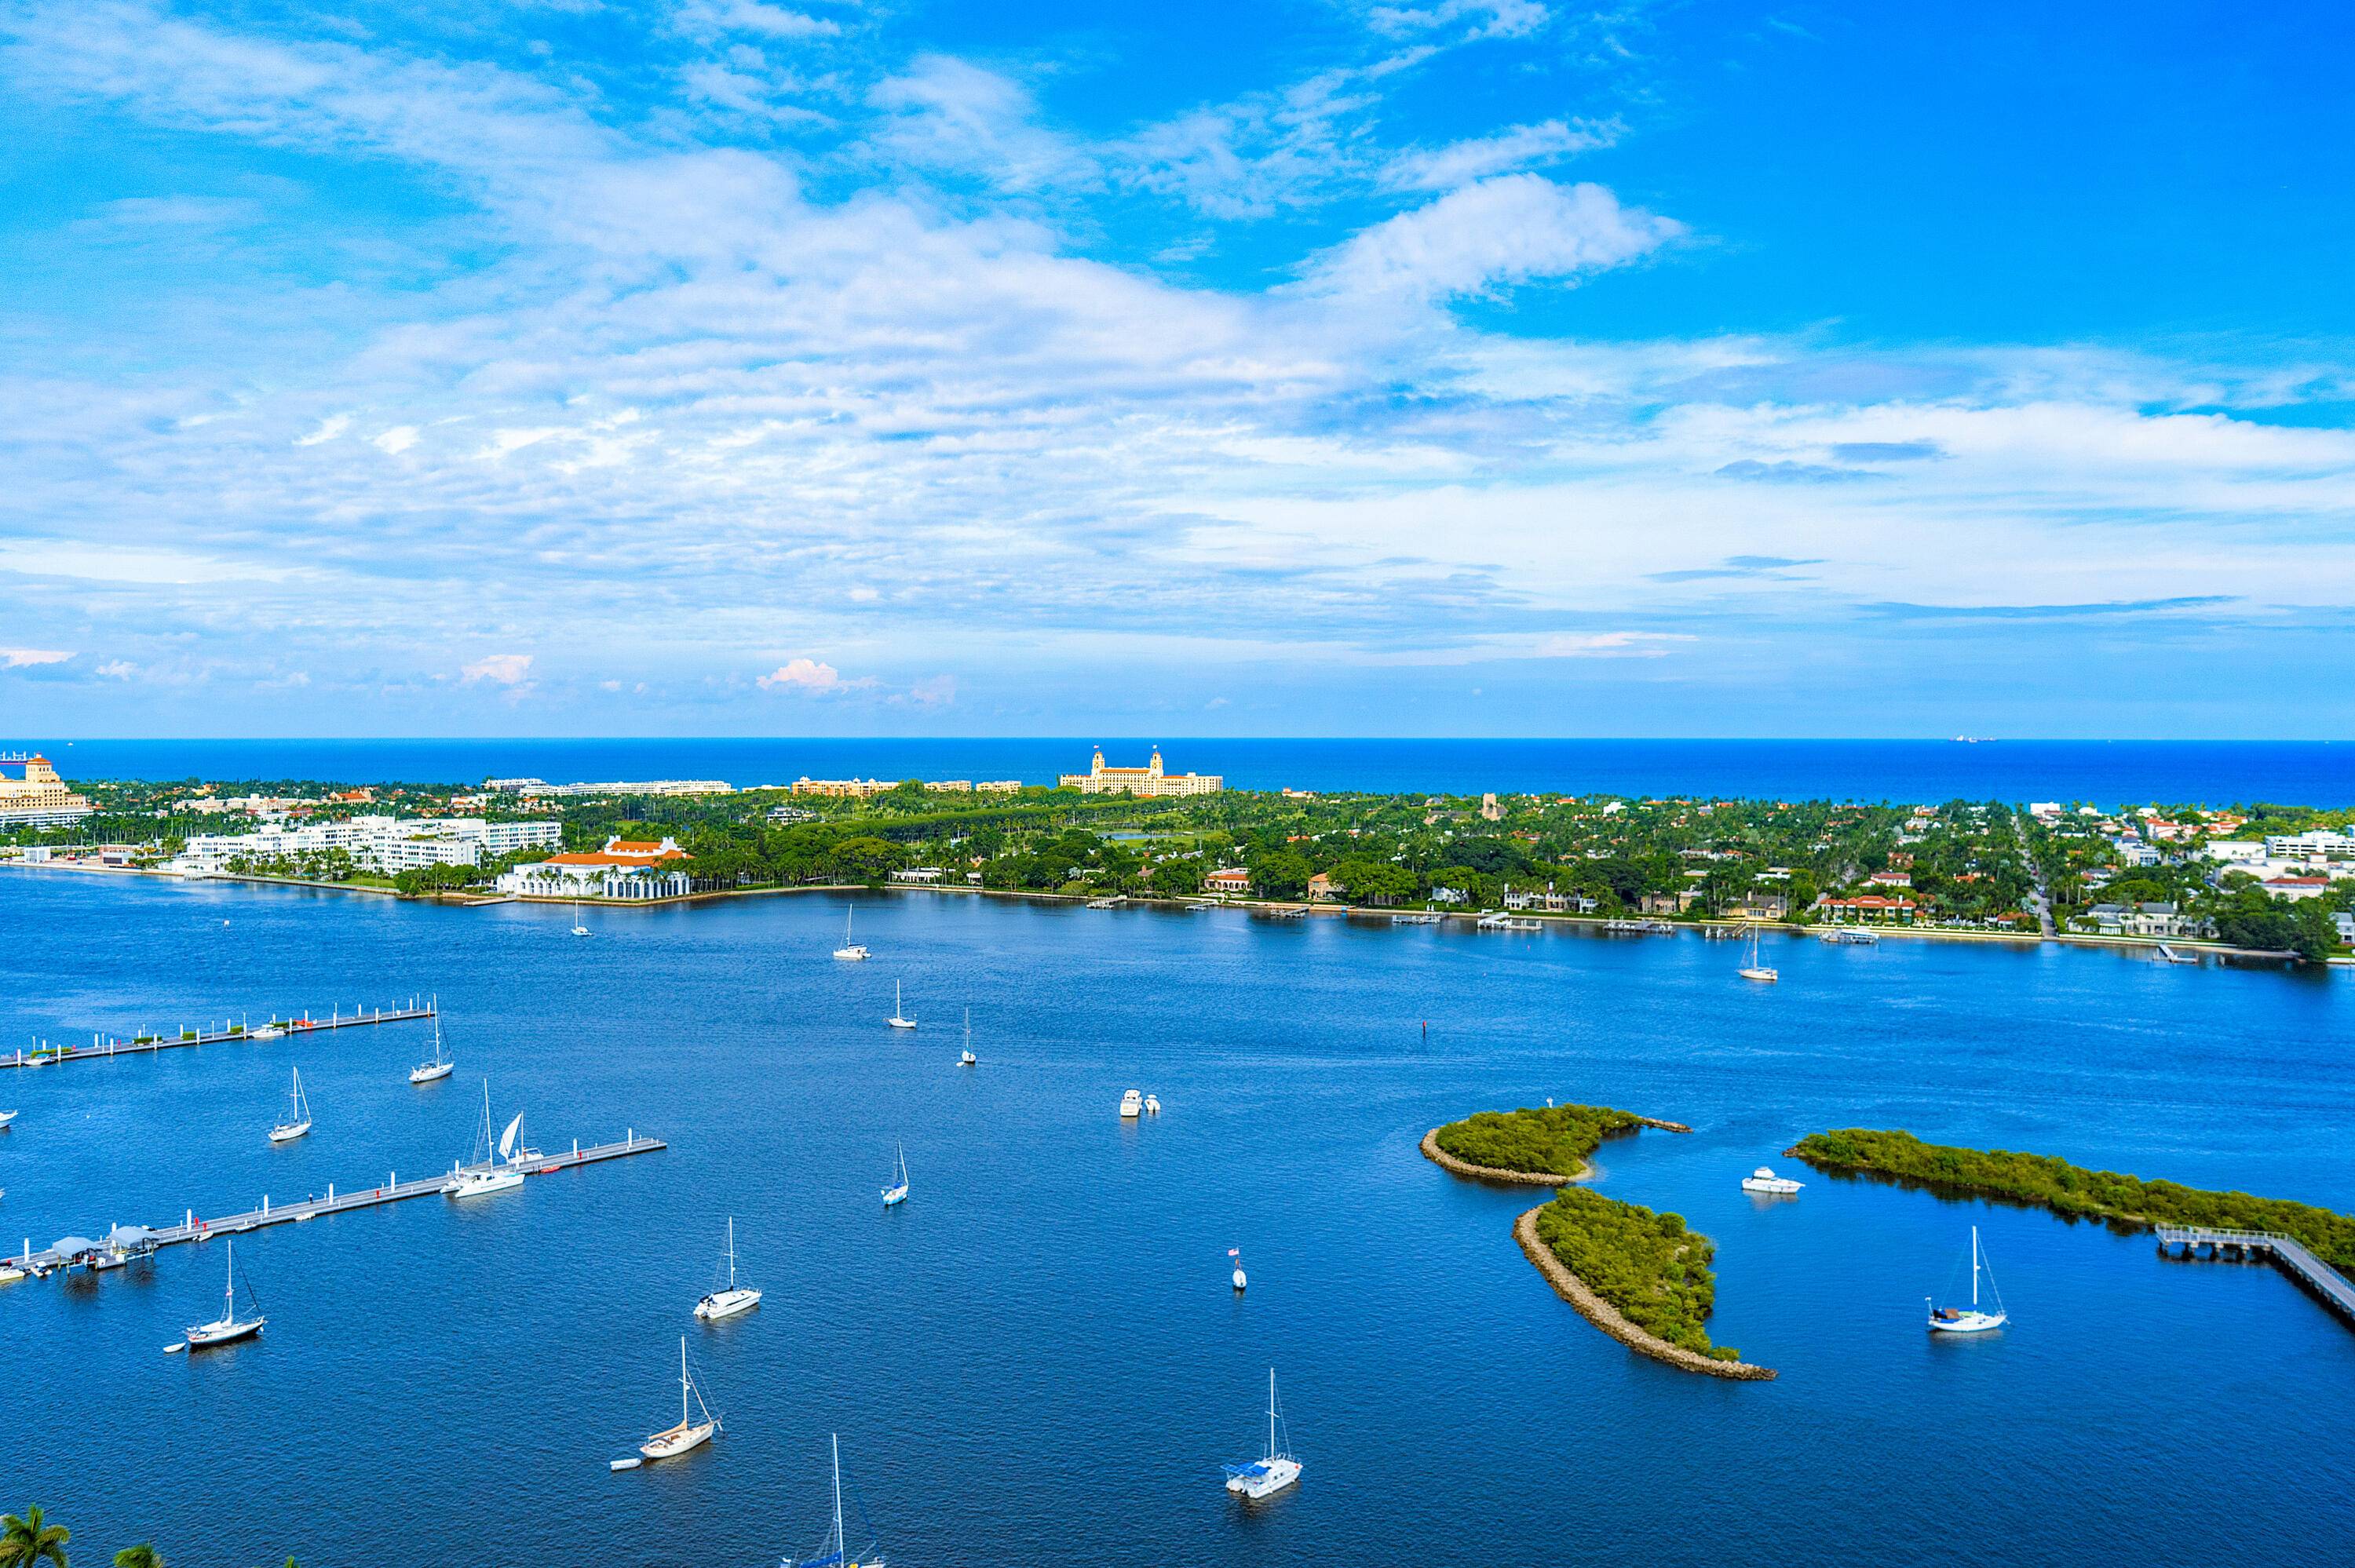 Incredible expansive views of the Intracoastal and Ocean from this high floor, spacious 3BR 2.